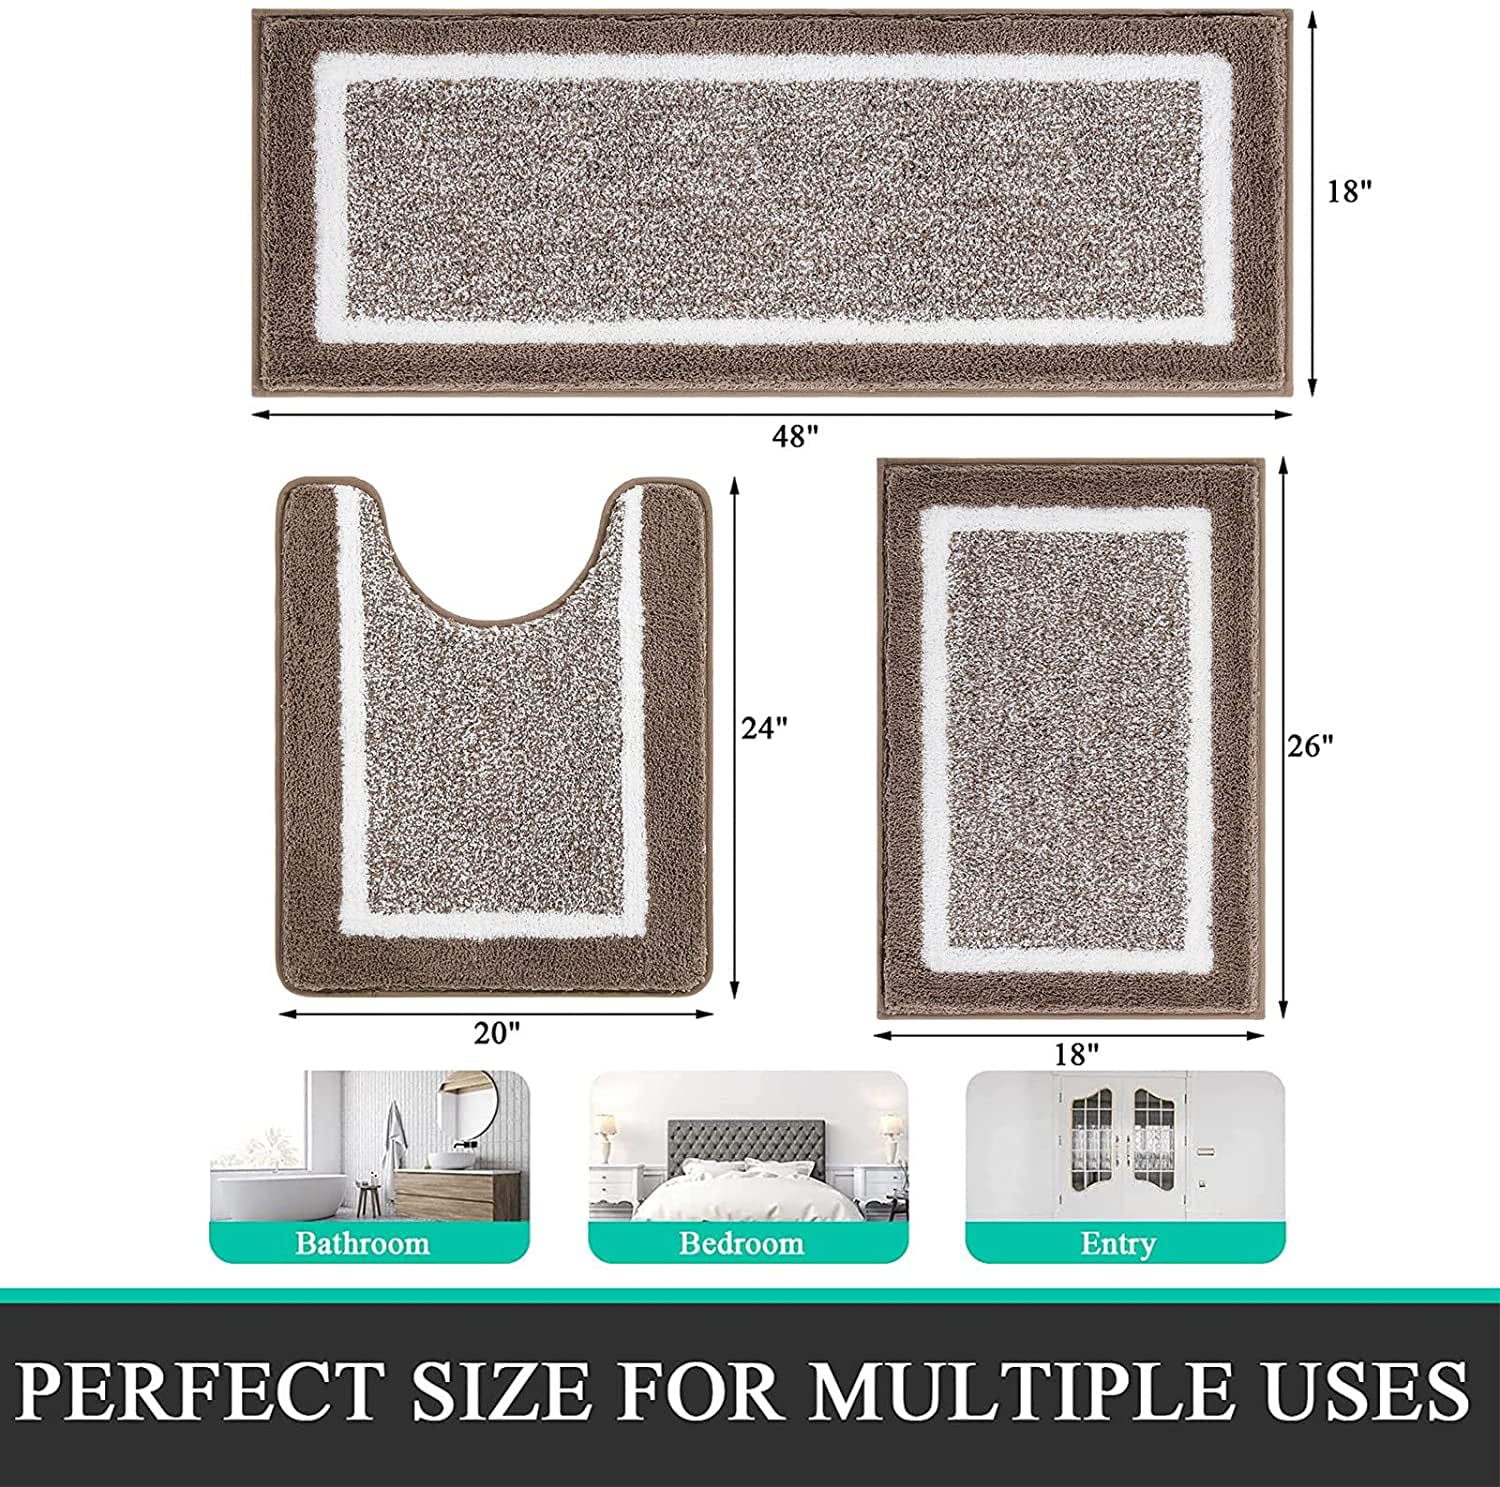  Kmson 2 Piece Ombre Bathroom Rugs Set with U-Shaped Mat, Non  Slip,Quick Drying, Ultra Soft and Water Absorbent Bath Carpet for Bedroom  Floor Living Room,Machine Washable Blue : Home & Kitchen